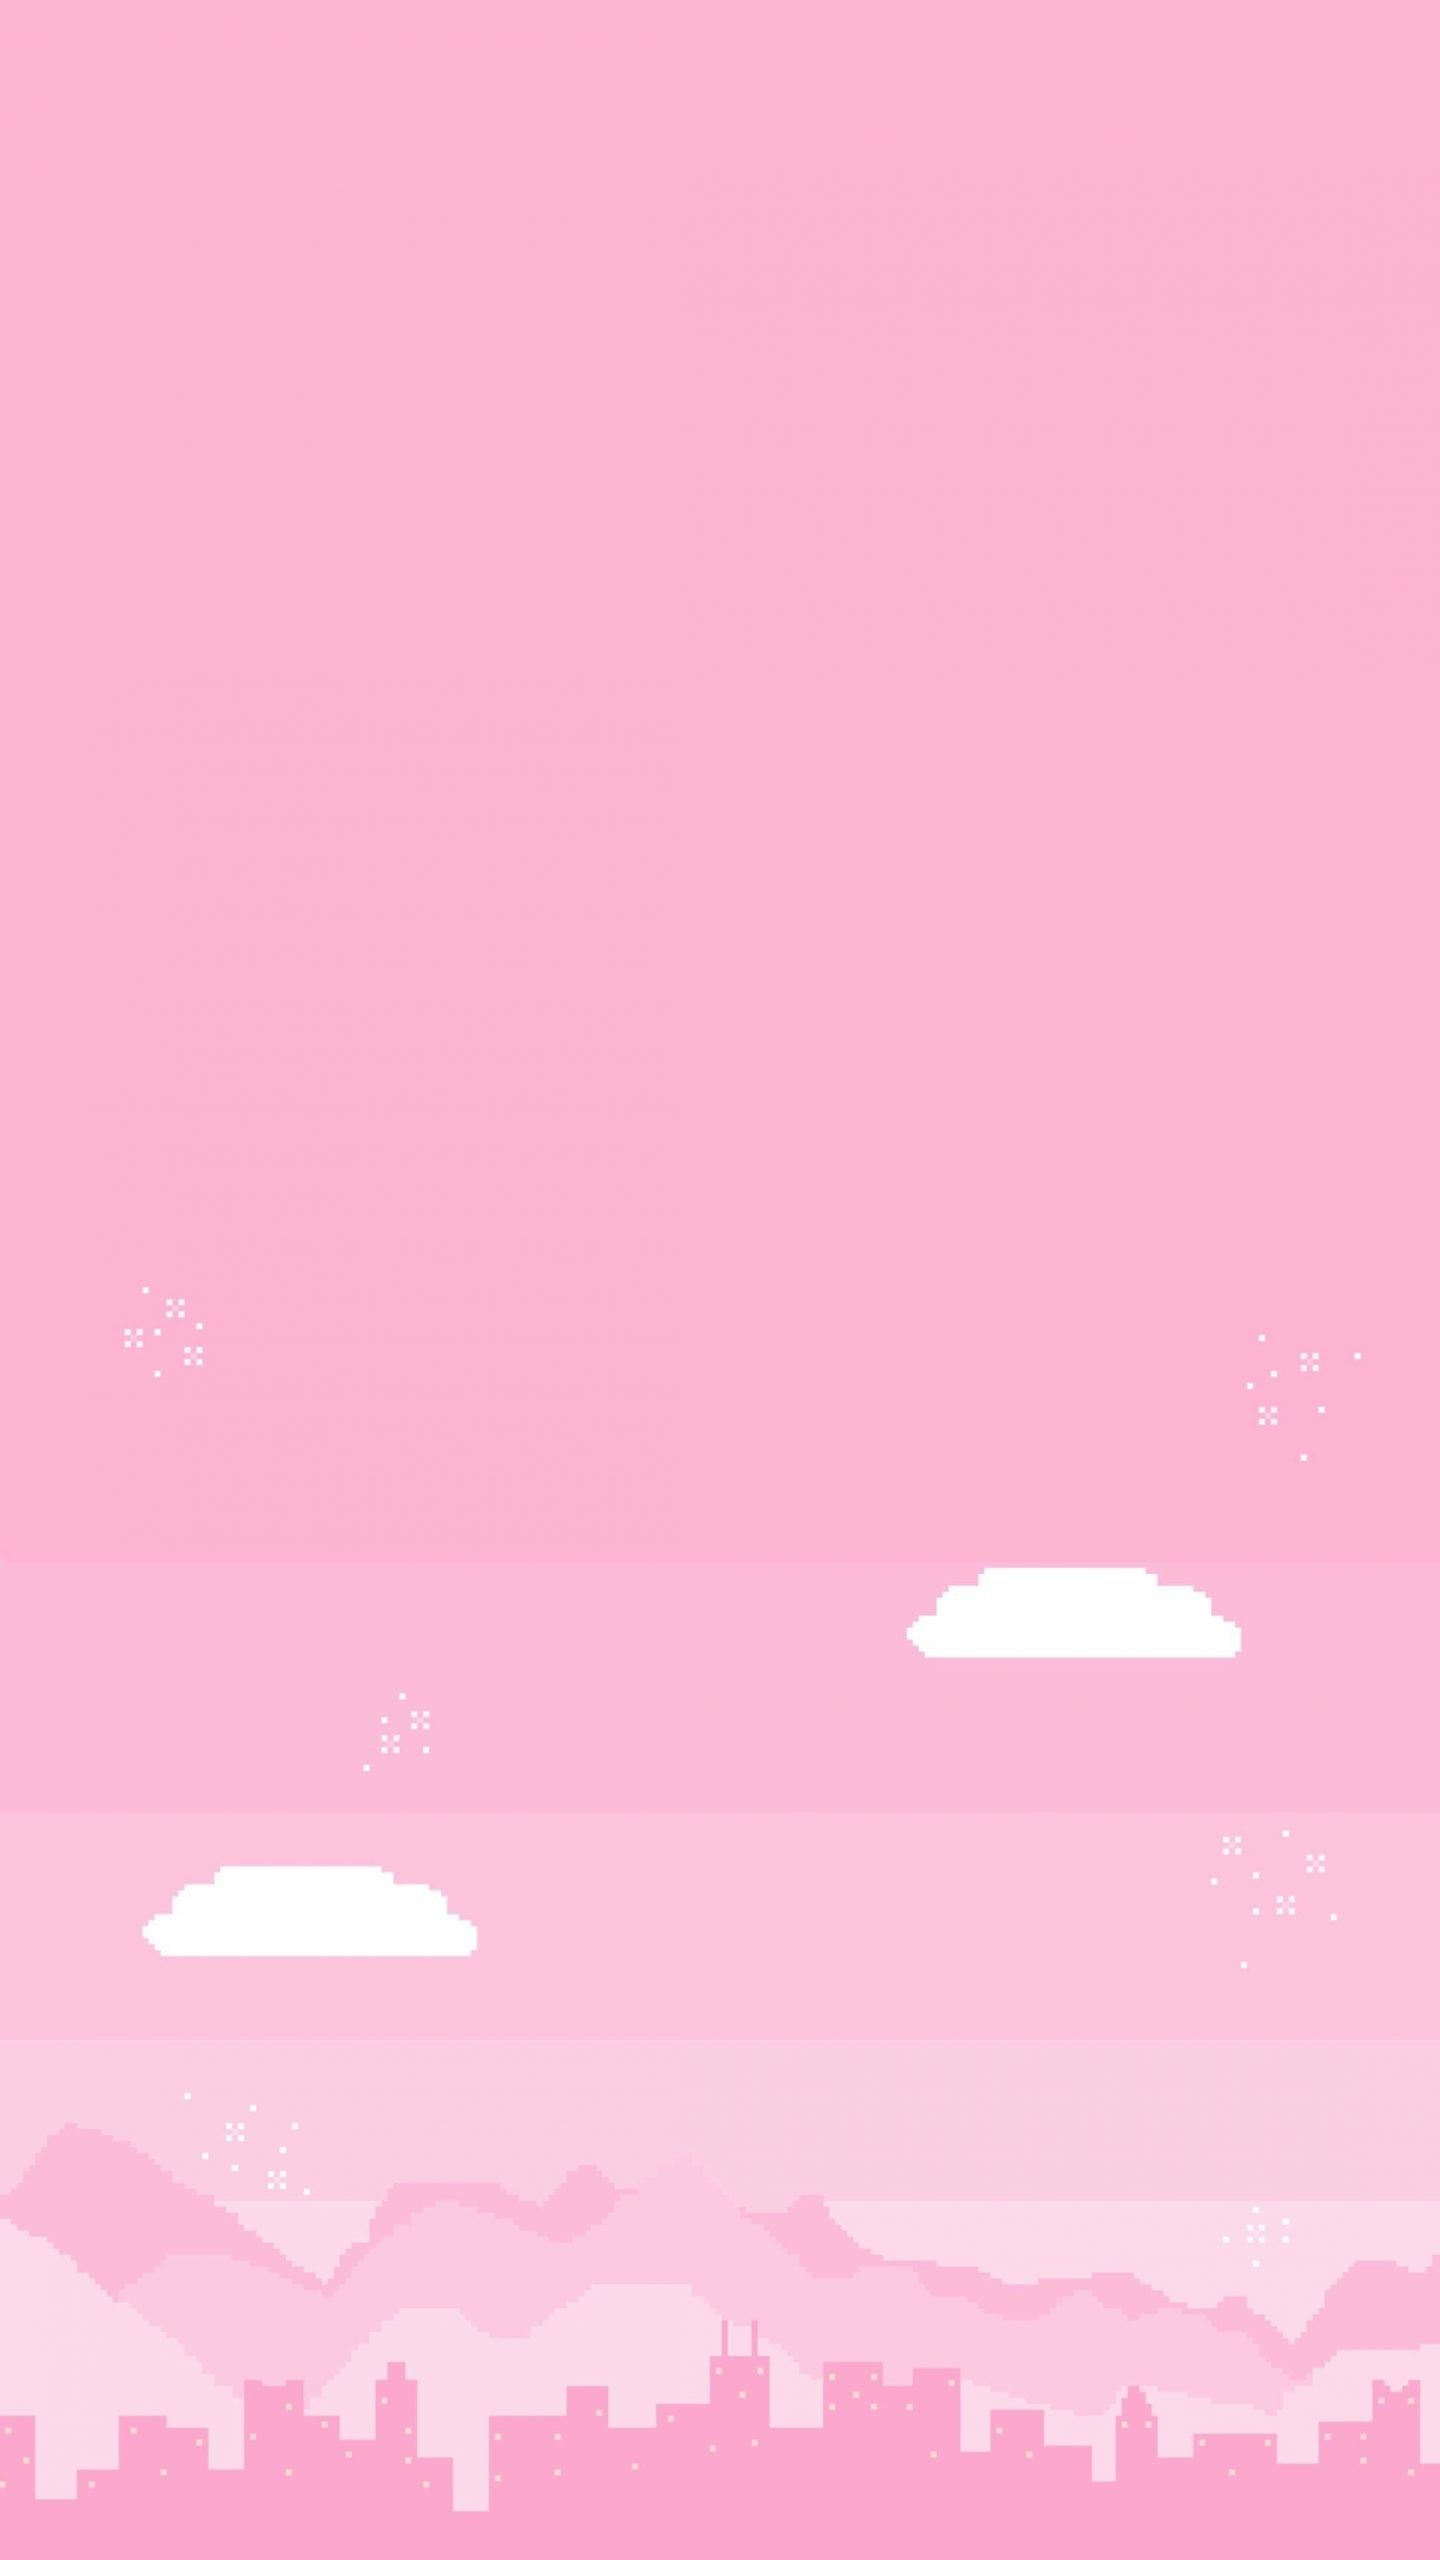 A pink sky with clouds and mountains - Anime, pink, pink anime, cute pink